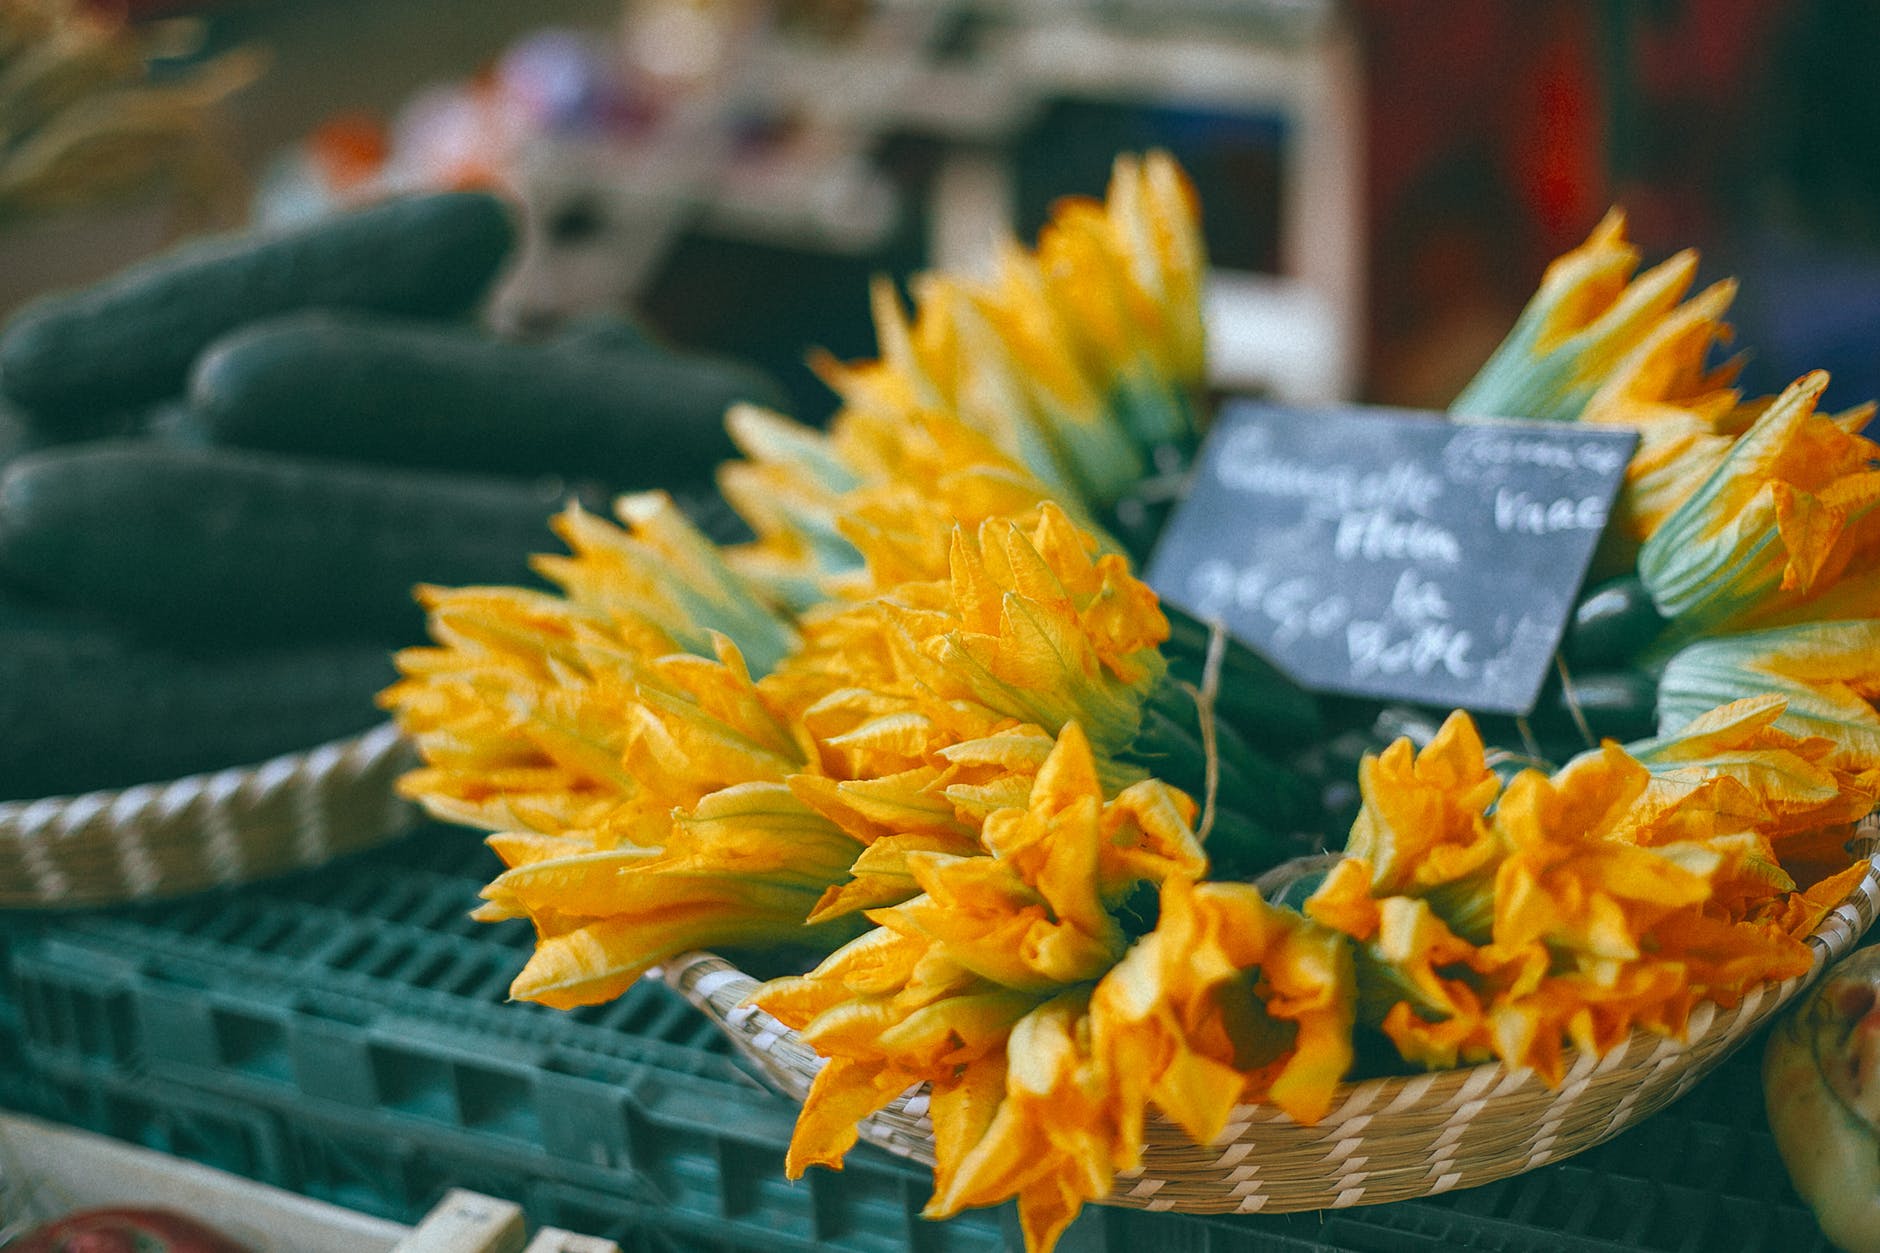 zucchini flowers with price at counter in market